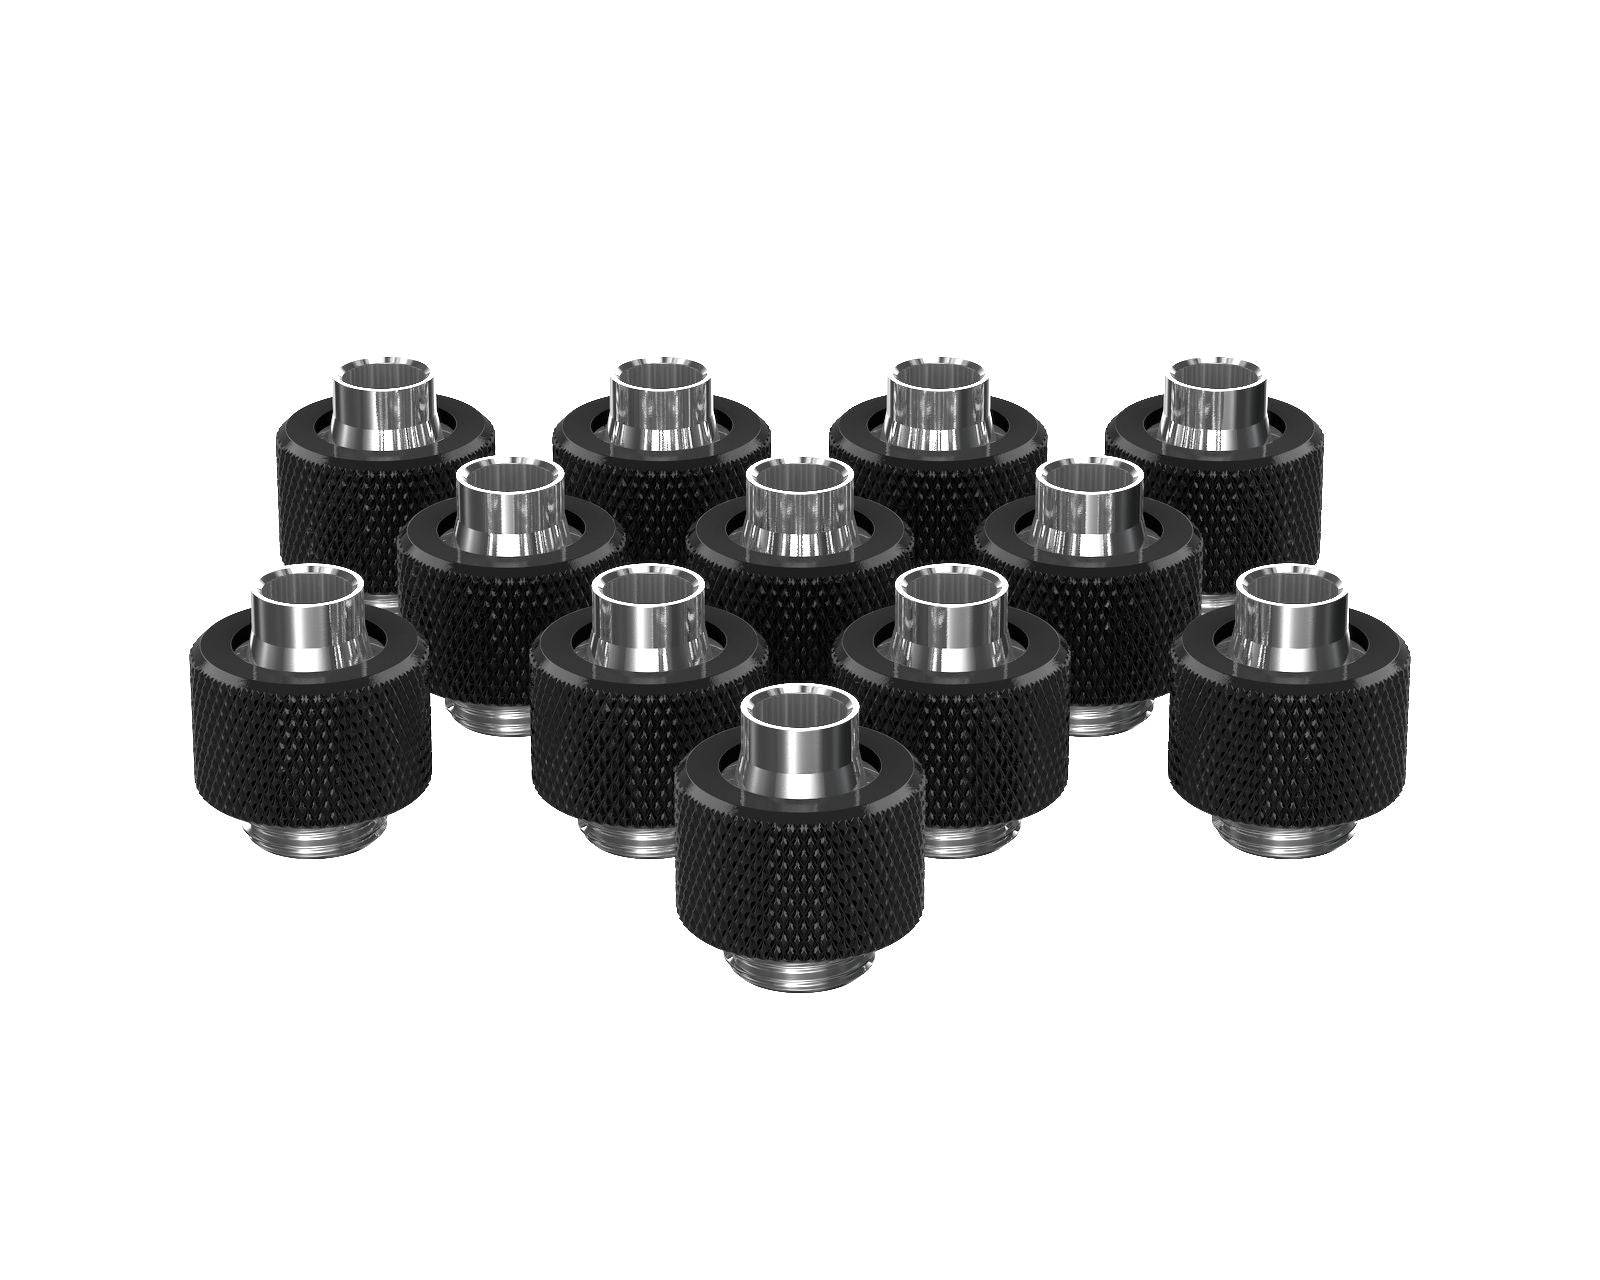 PrimoChill SecureFit SX - Premium Compression Fitting For 3/8in ID x 1/2in OD Flexible Tubing 12 Pack (F-SFSX12-12) - Available in 20+ Colors, Custom Watercooling Loop Ready - Satin Black